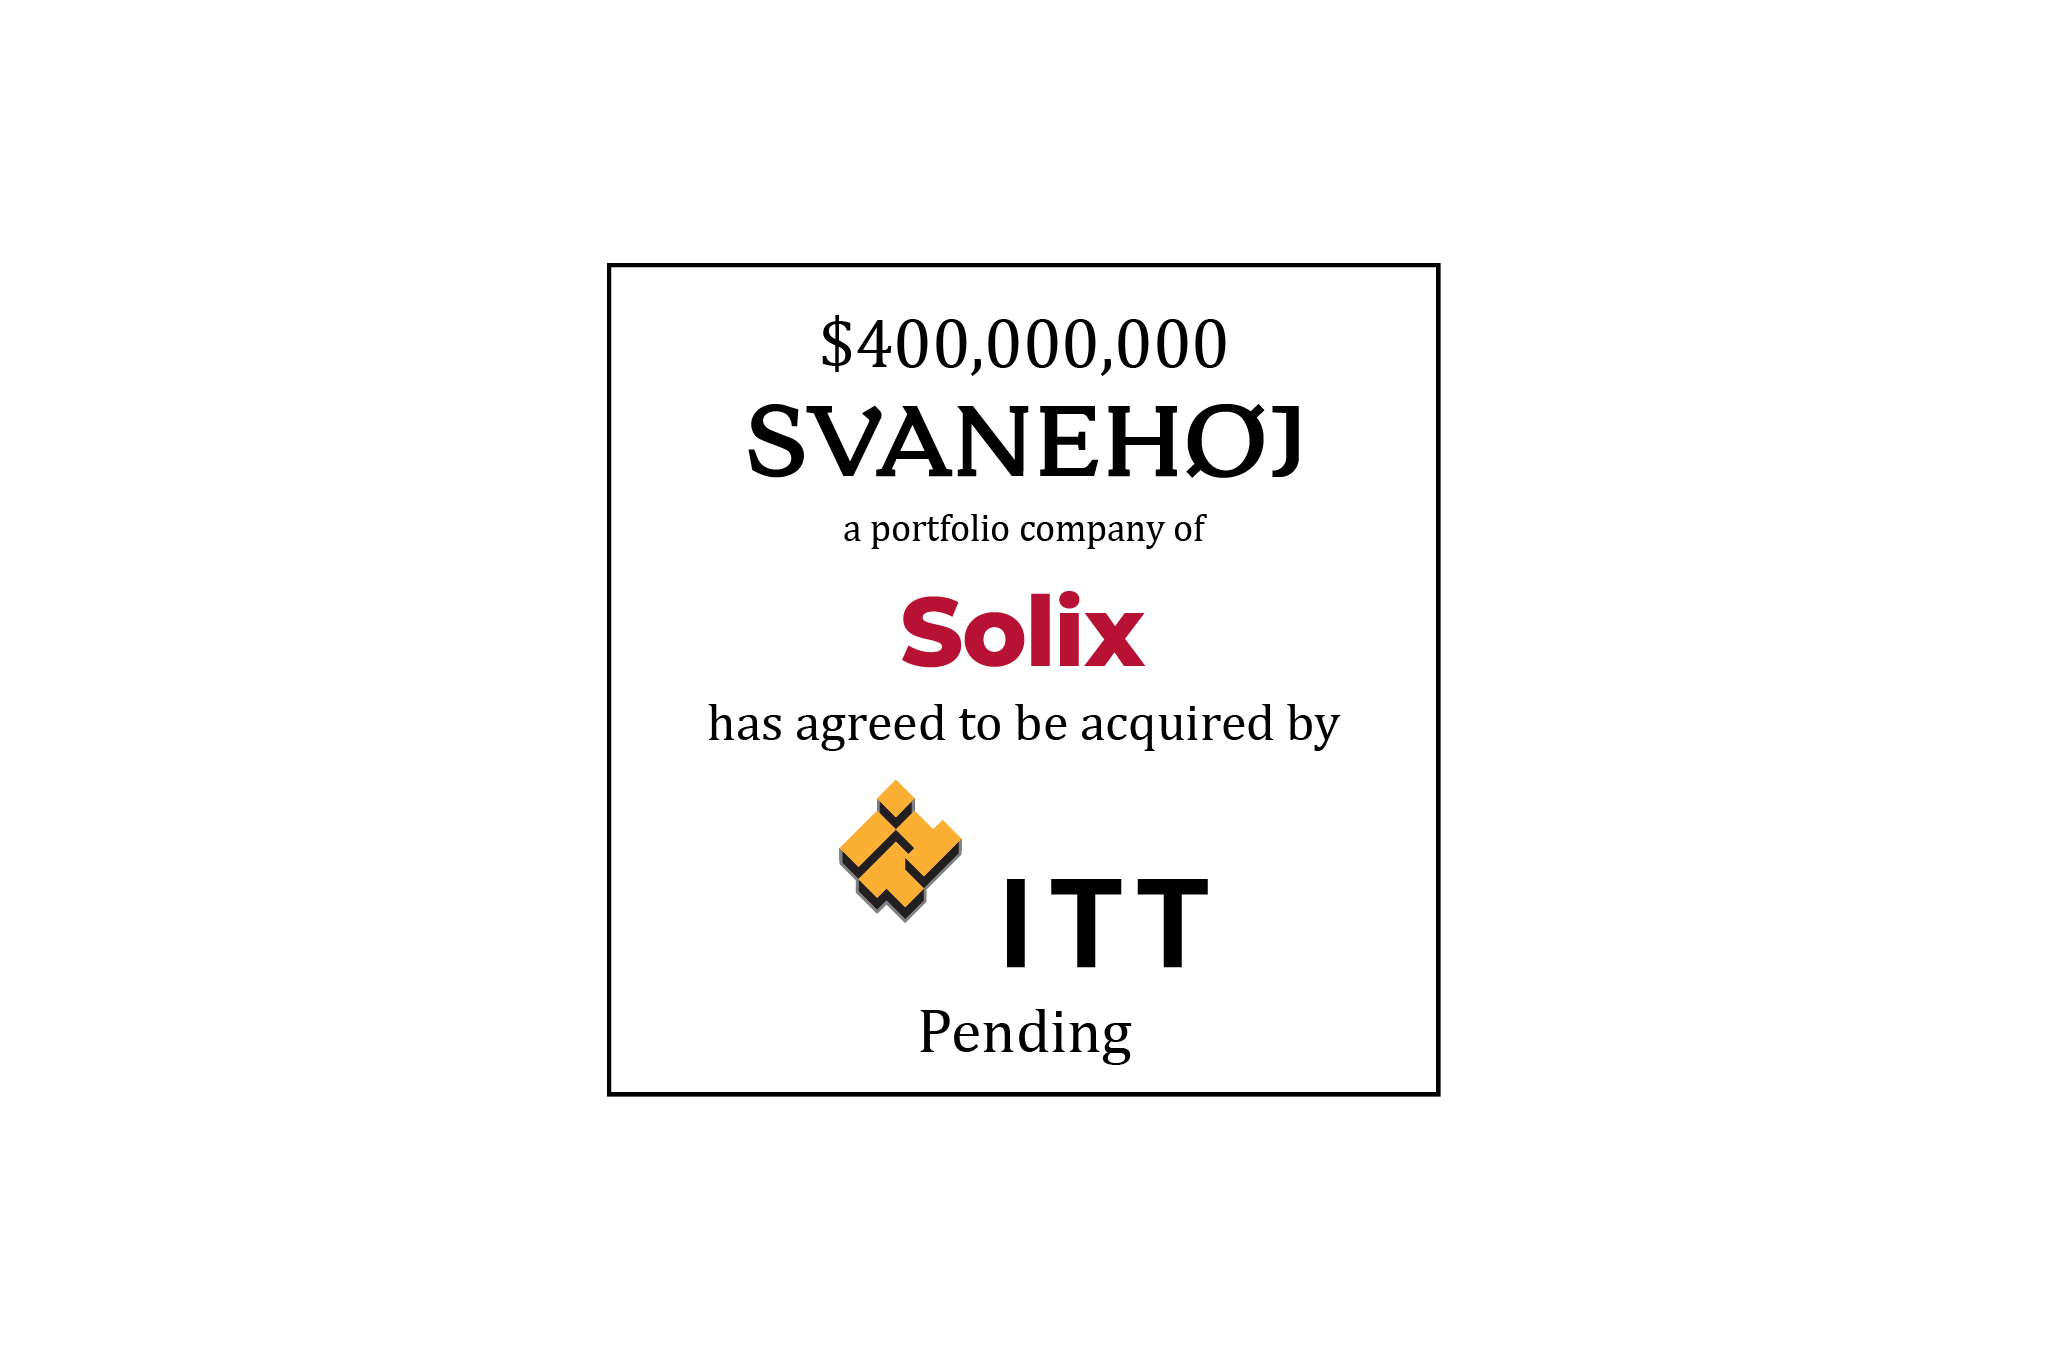 $400,000,000 | Svanehøj Group A/S (logo), a portfolio company of Solix Group AB (logo), has agreed to be acquired by ITT Inc. (logo) | Pending